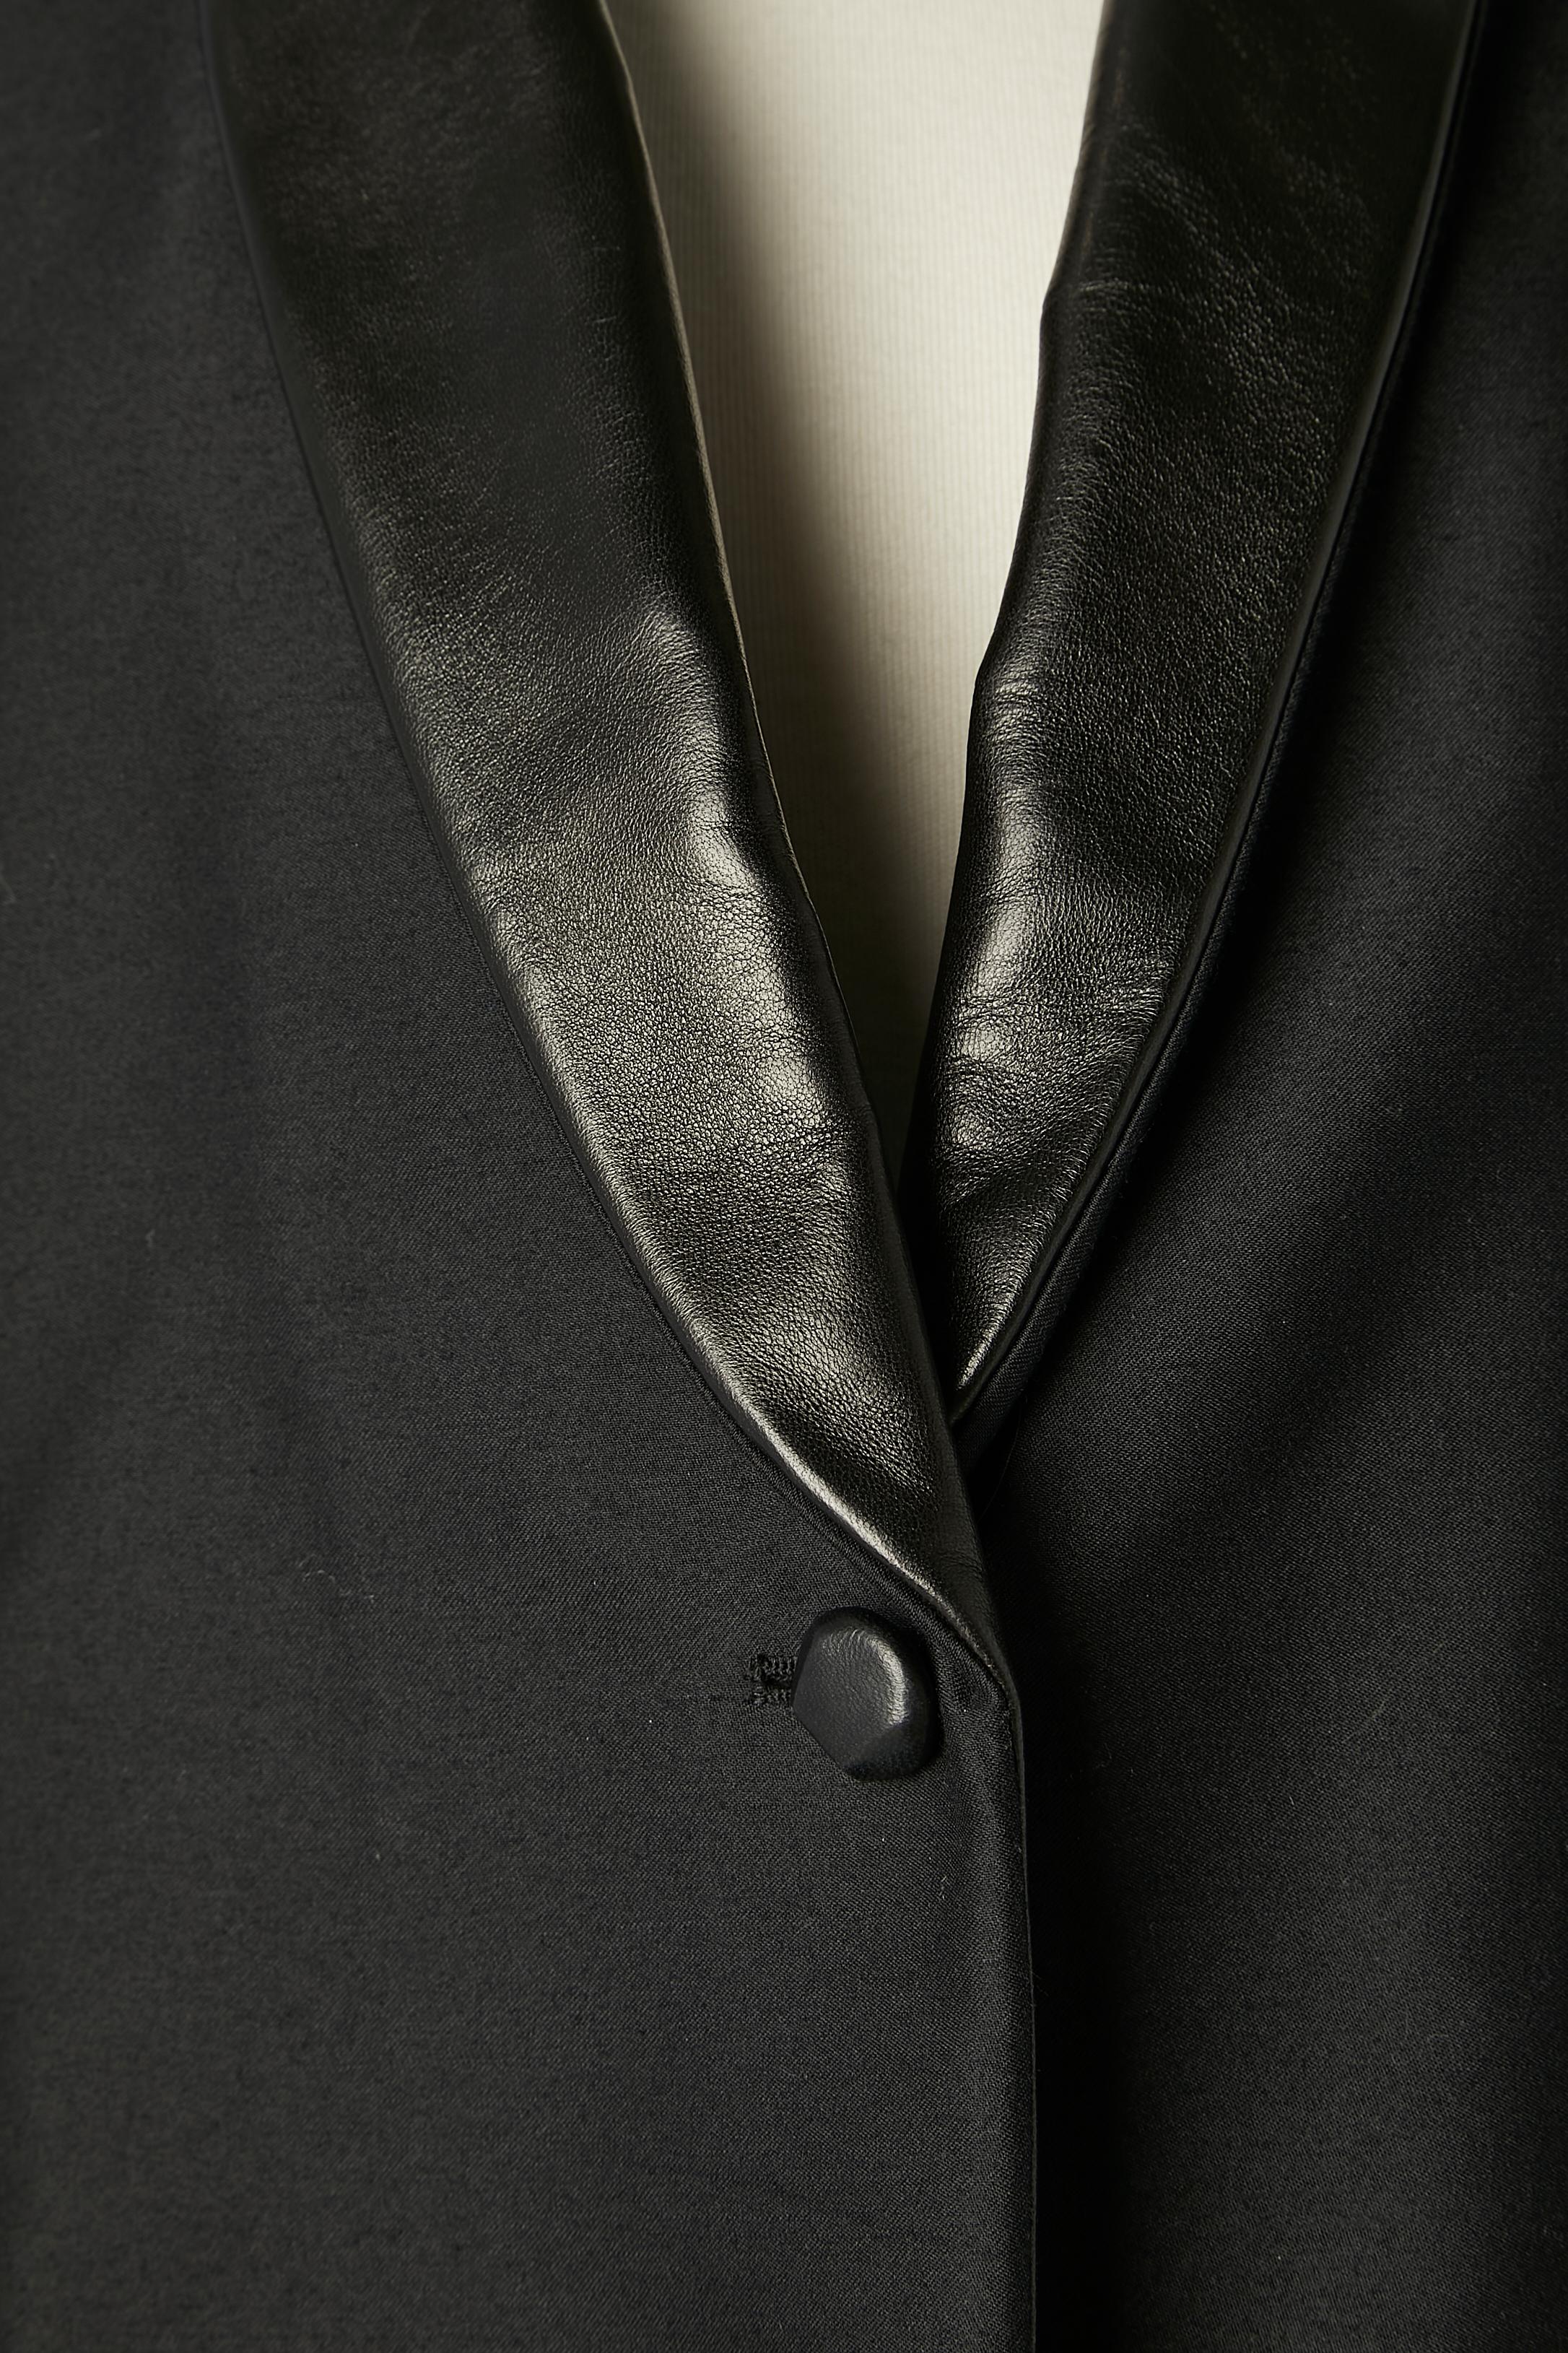 Black wool single-breasted tuxedo with black leather collar. Split in the middle back = 19 cm. Leather button.
Fabric composition: 79% wool, 21 % silk . Leather (agnello lamb)
Silk lining. F/W 2012
SIZE 38 (M)
